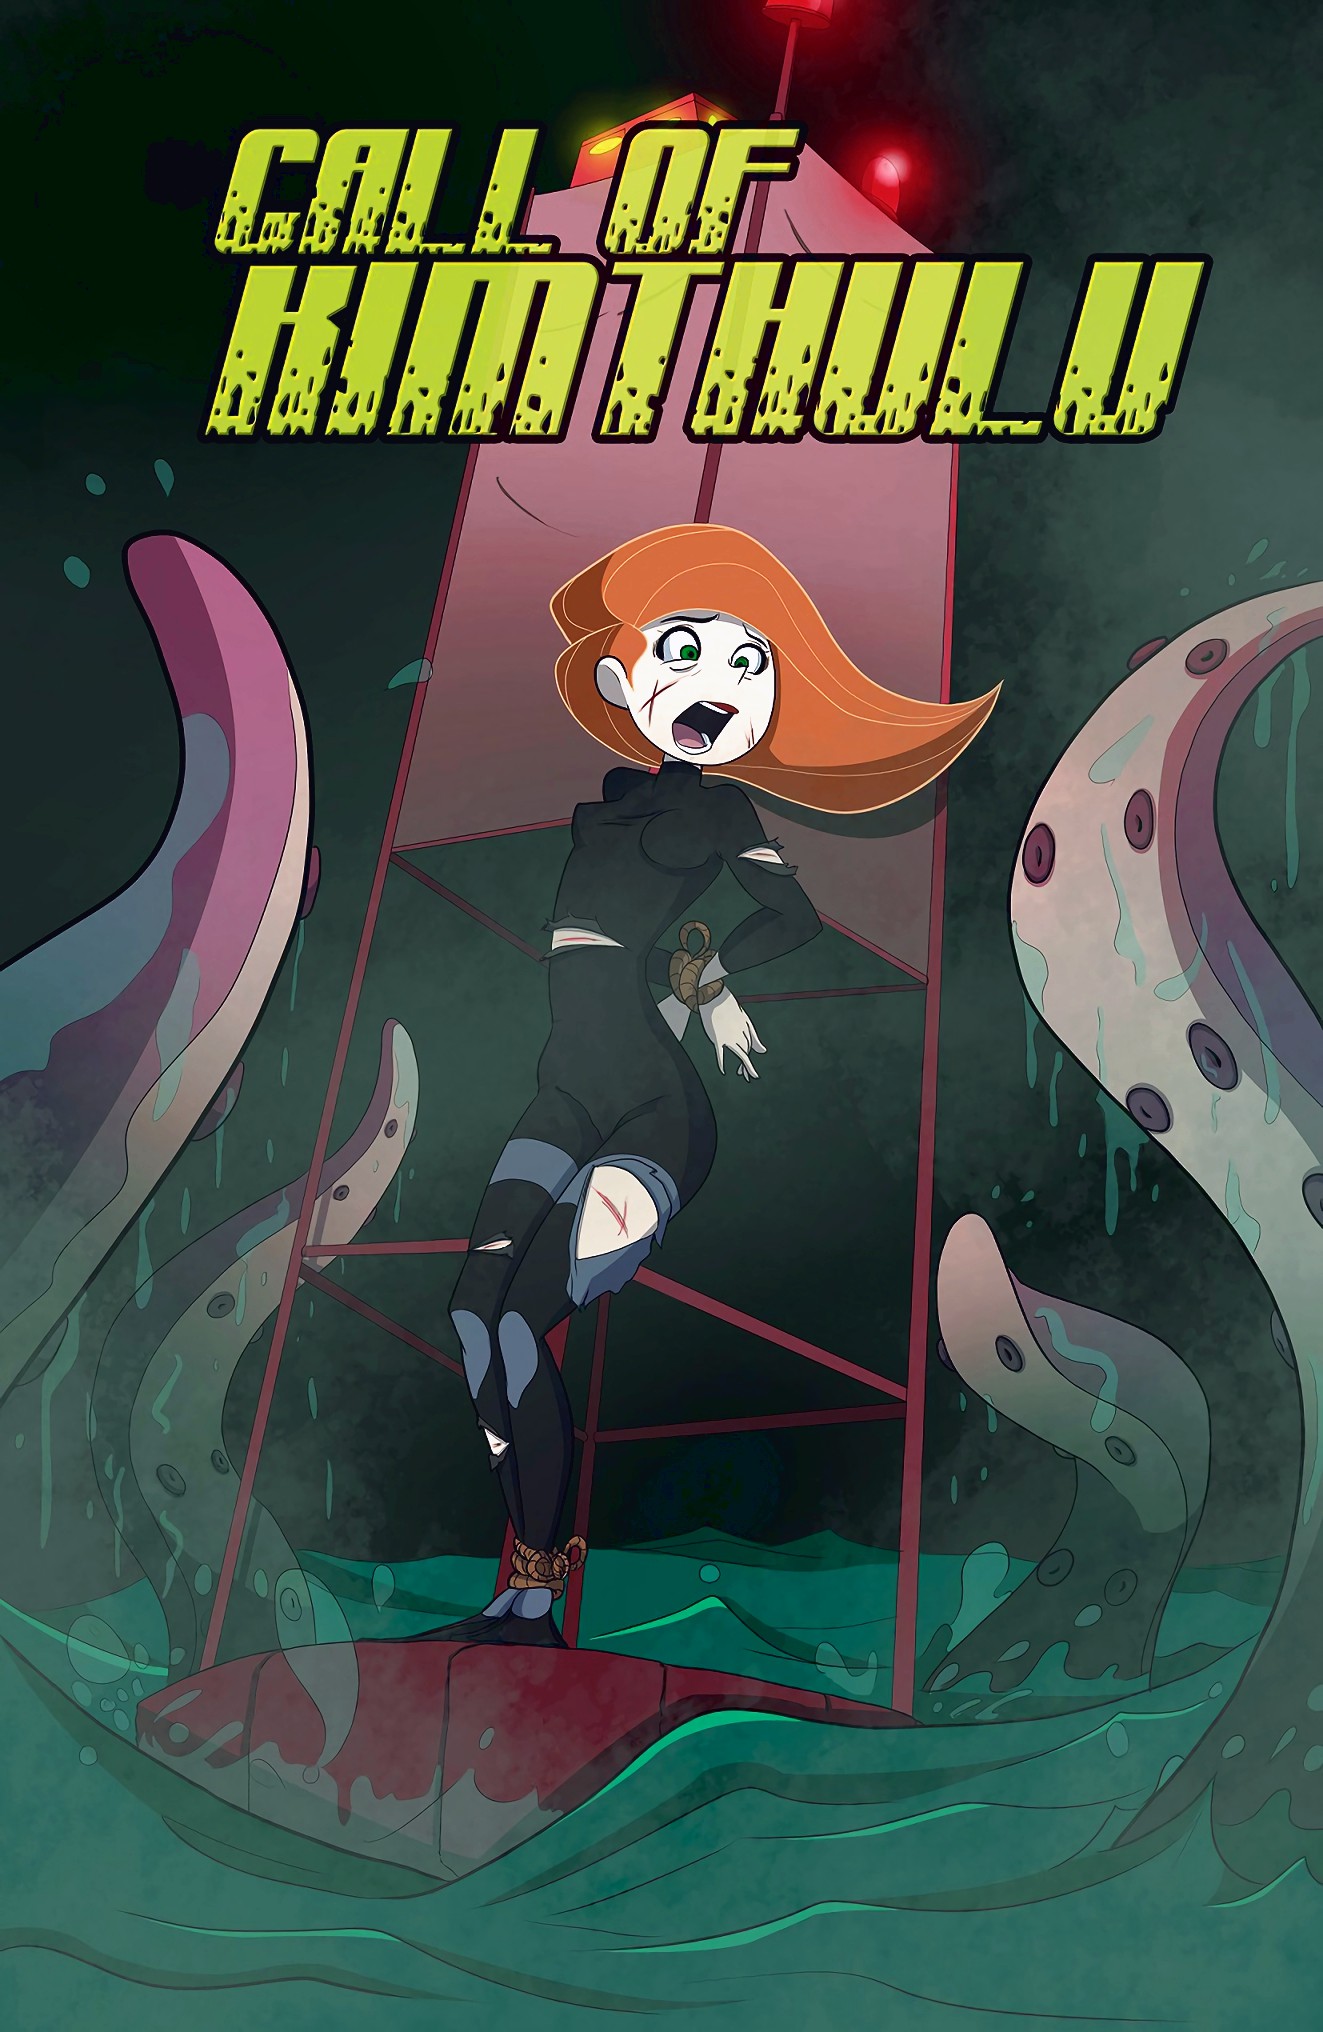 Call of Kimthulu porn comic page 001 on category Kim Possible